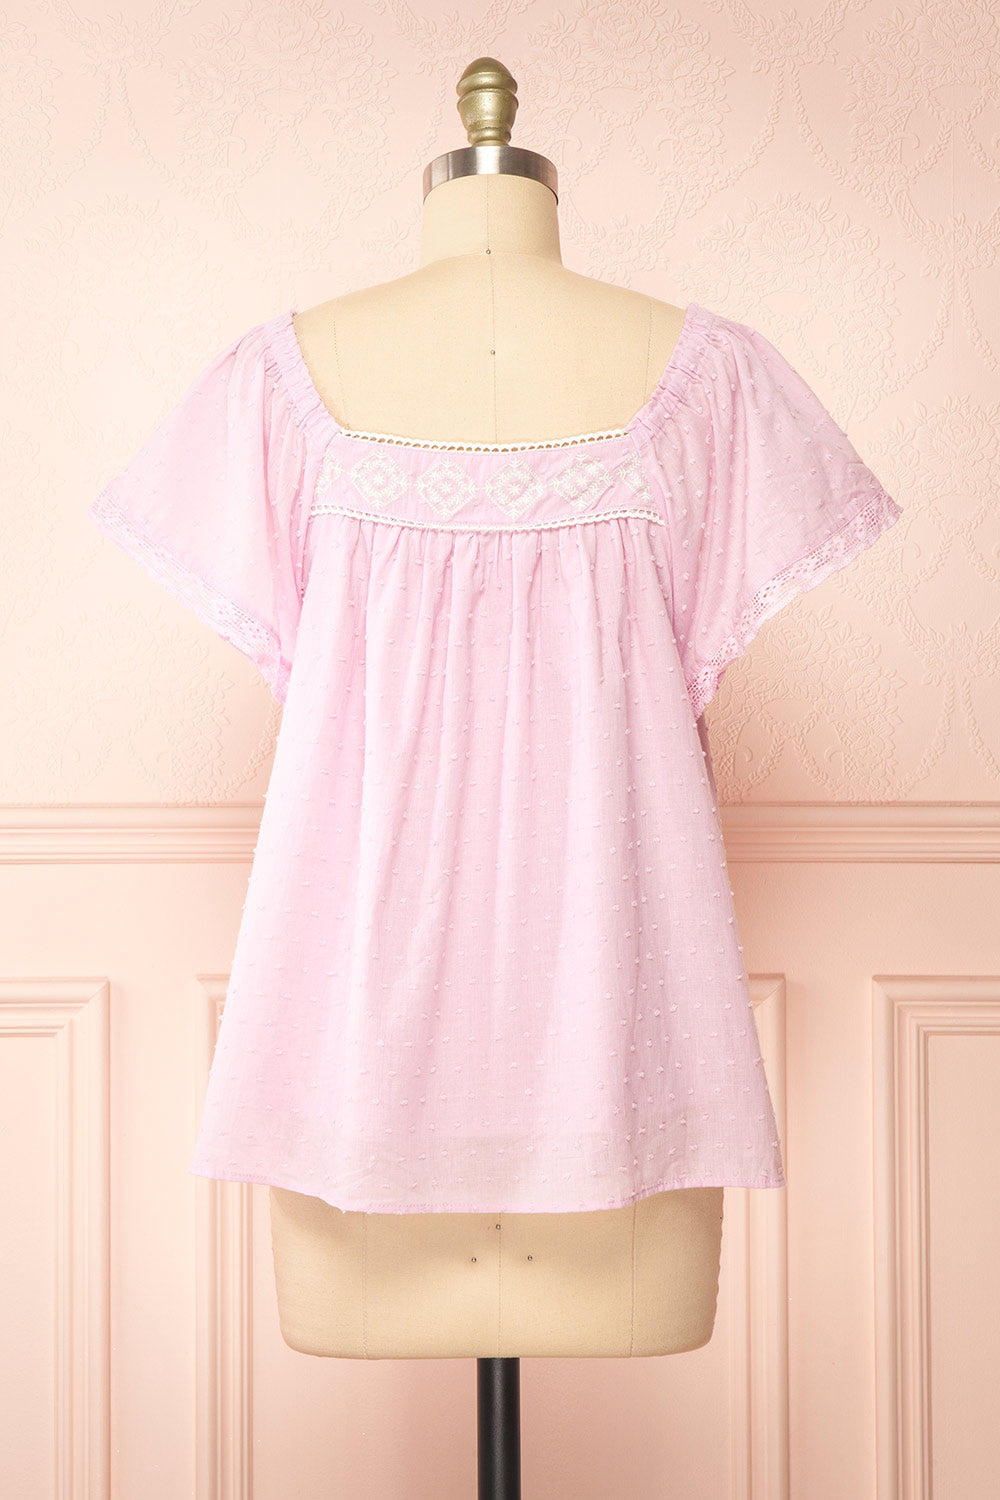 Khalesy Pink Short Sleeve Top w/ Embroidery | Boutique 1861 back view